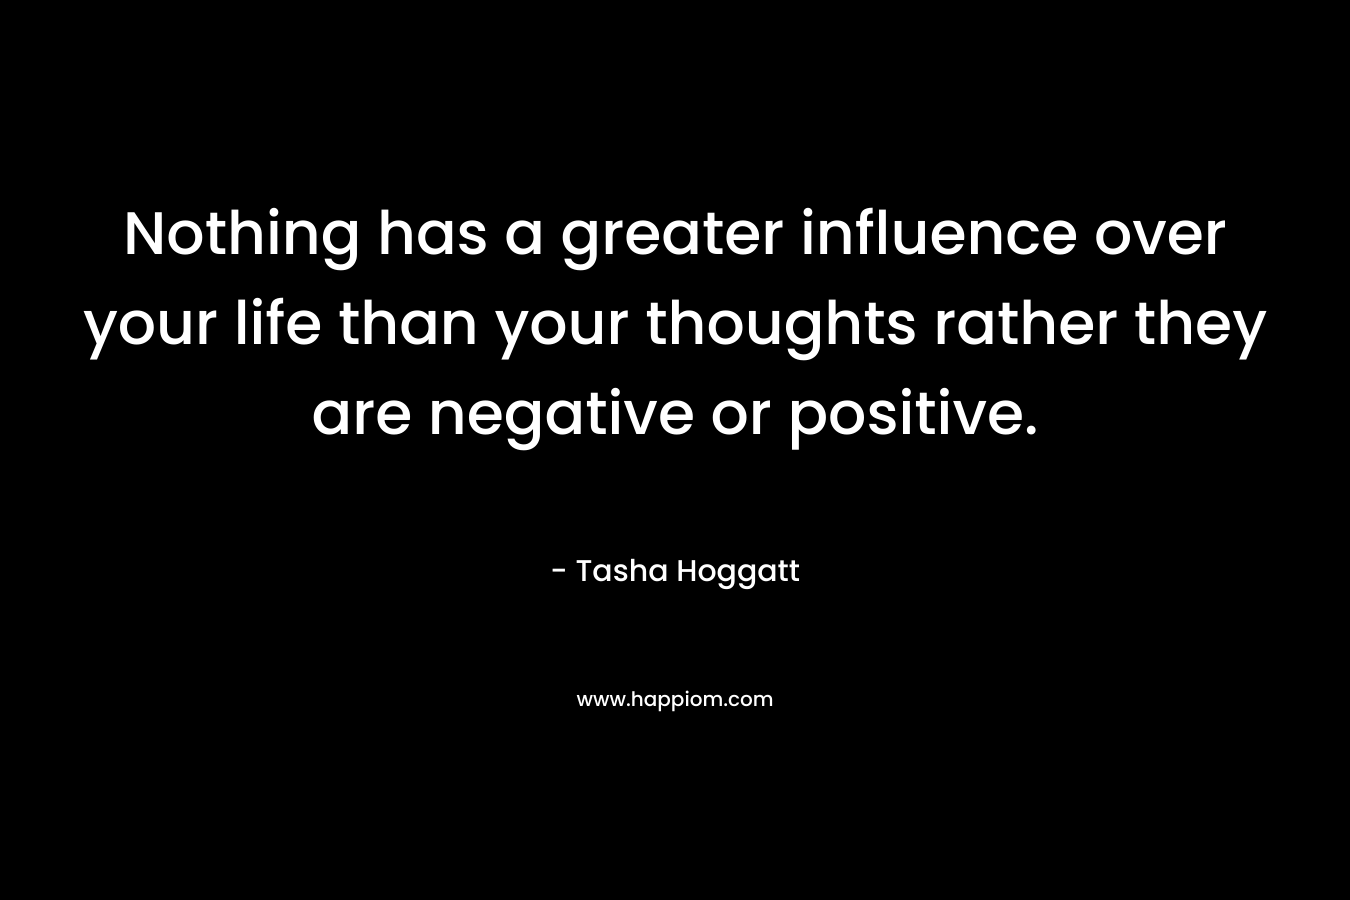 Nothing has a greater influence over your life than your thoughts rather they are negative or positive. – Tasha Hoggatt